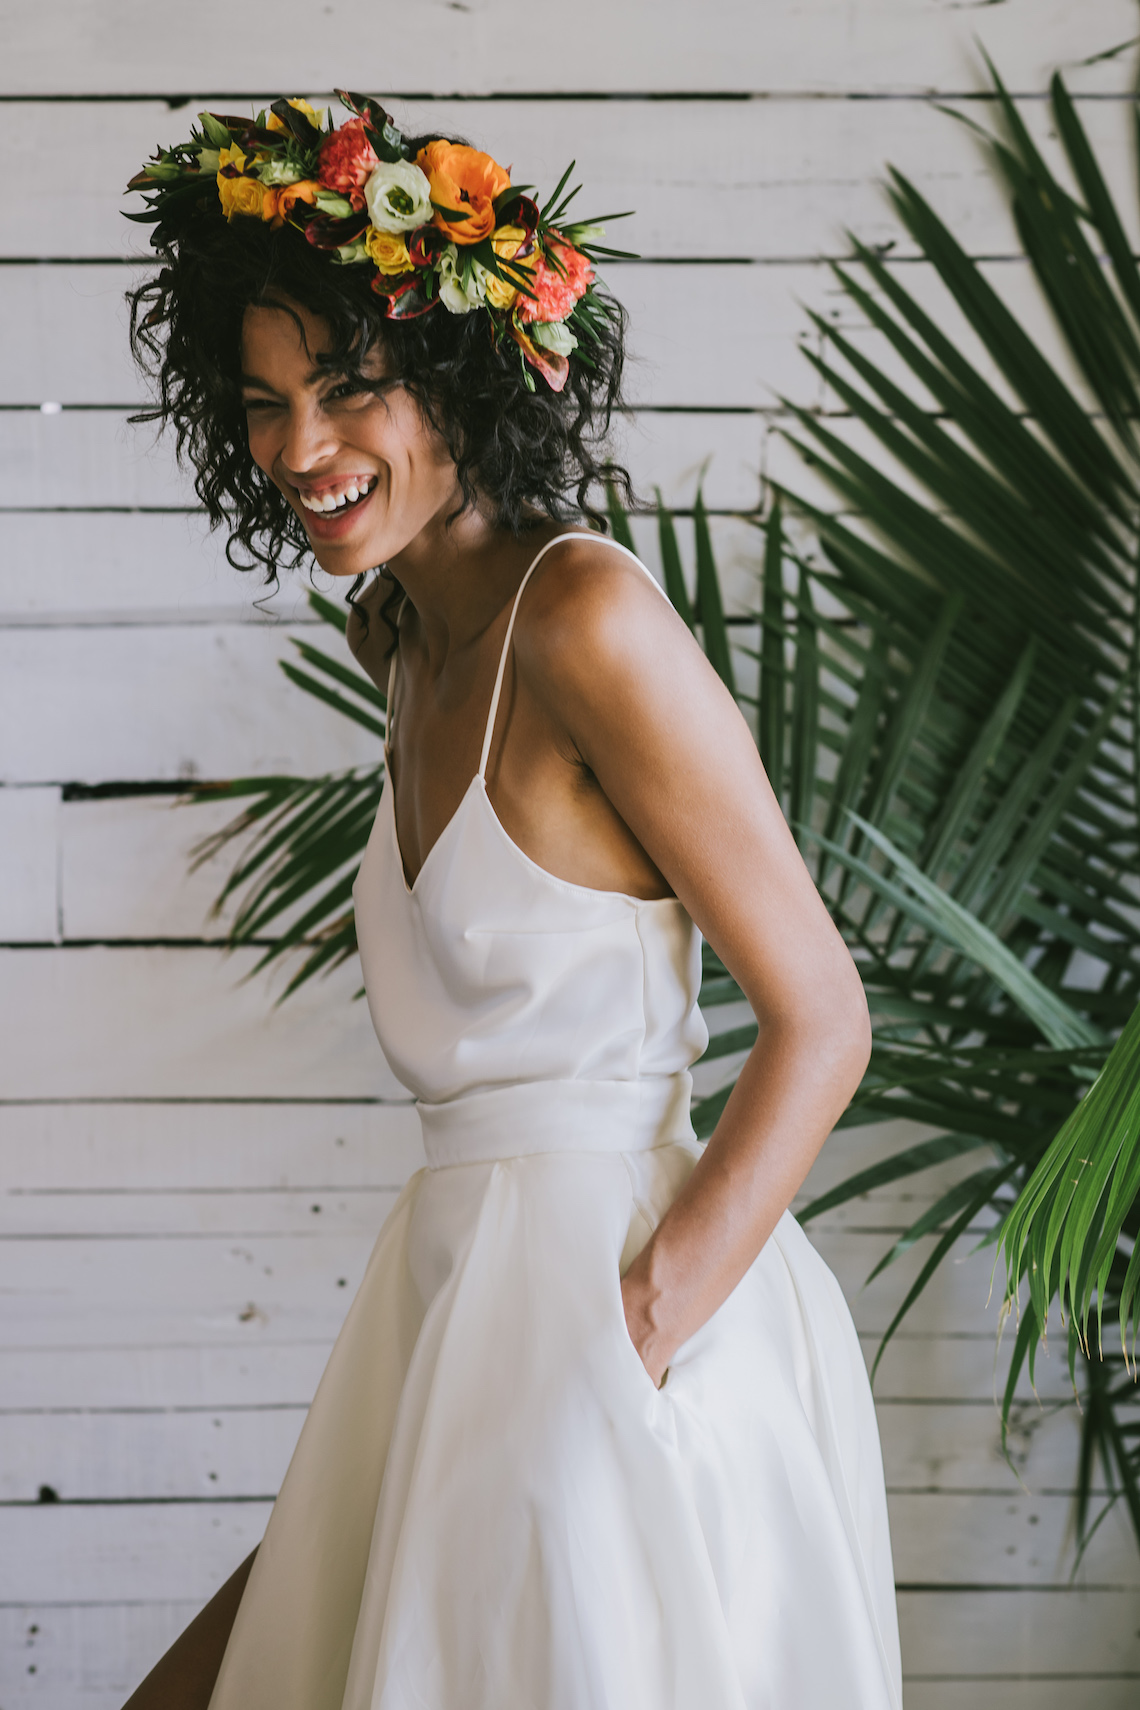 Boho Gowns & Cool Bridal Separates From The Tropical Town of Brooklyn | Loulette Bride 30